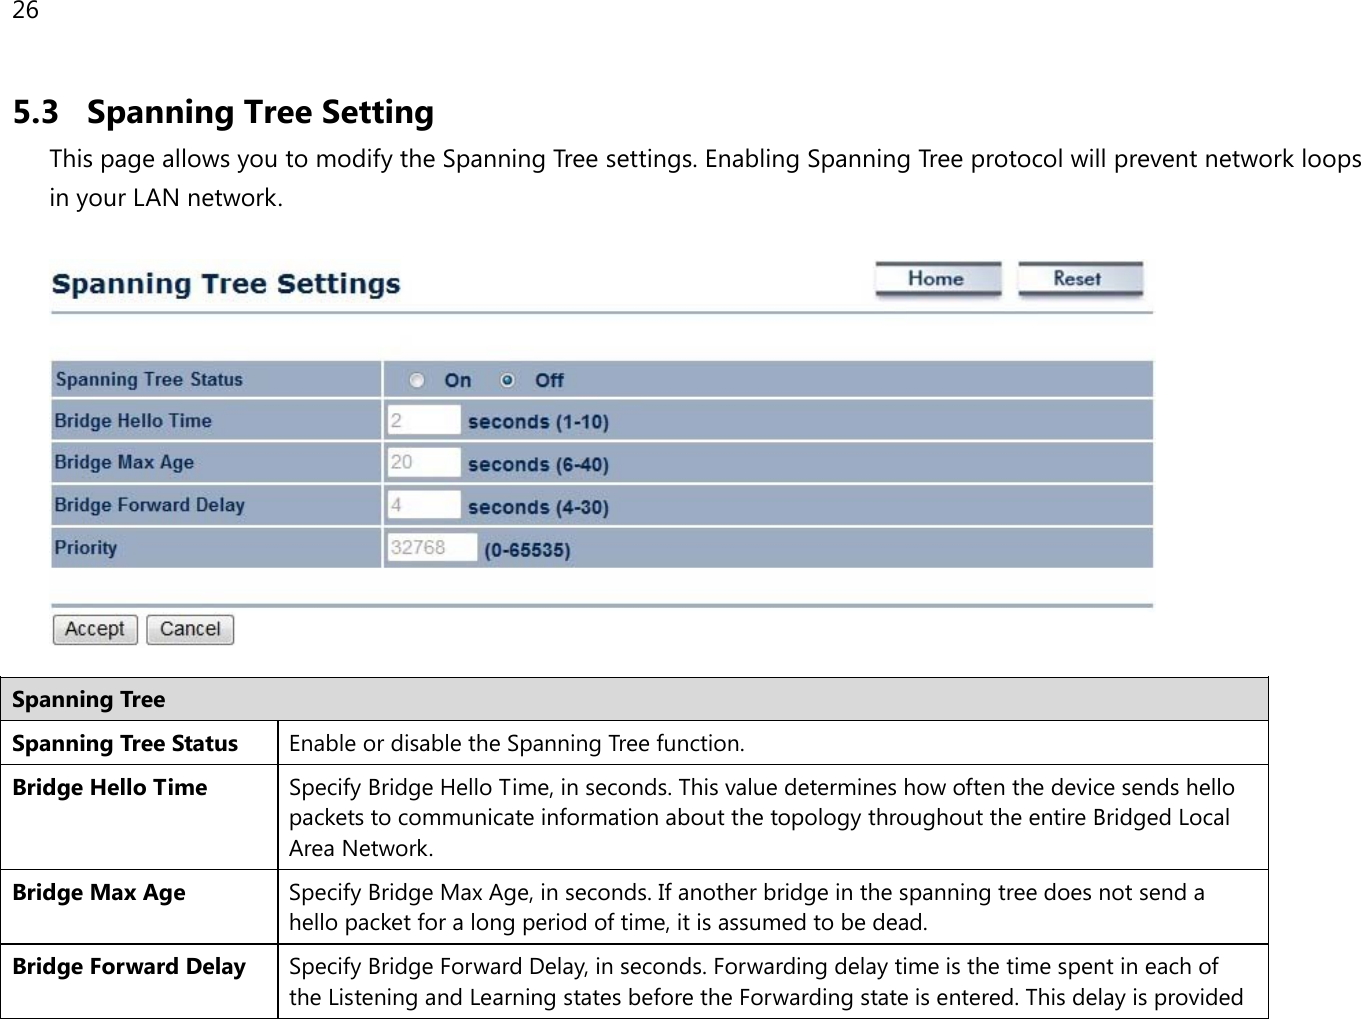 26  5.3 Spanning Tree Setting This page allows you to modify the Spanning Tree settings. Enabling Spanning Tree protocol will prevent network loops in your LAN network.    Spanning Tree Spanning Tree Status Enable or disable the Spanning Tree function. Bridge Hello Time Specify Bridge Hello Time, in seconds. This value determines how often the device sends hello packets to communicate information about the topology throughout the entire Bridged Local Area Network. Bridge Max Age Specify Bridge Max Age, in seconds. If another bridge in the spanning tree does not send a hello packet for a long period of time, it is assumed to be dead. Bridge Forward Delay Specify Bridge Forward Delay, in seconds. Forwarding delay time is the time spent in each of the Listening and Learning states before the Forwarding state is entered. This delay is provided 